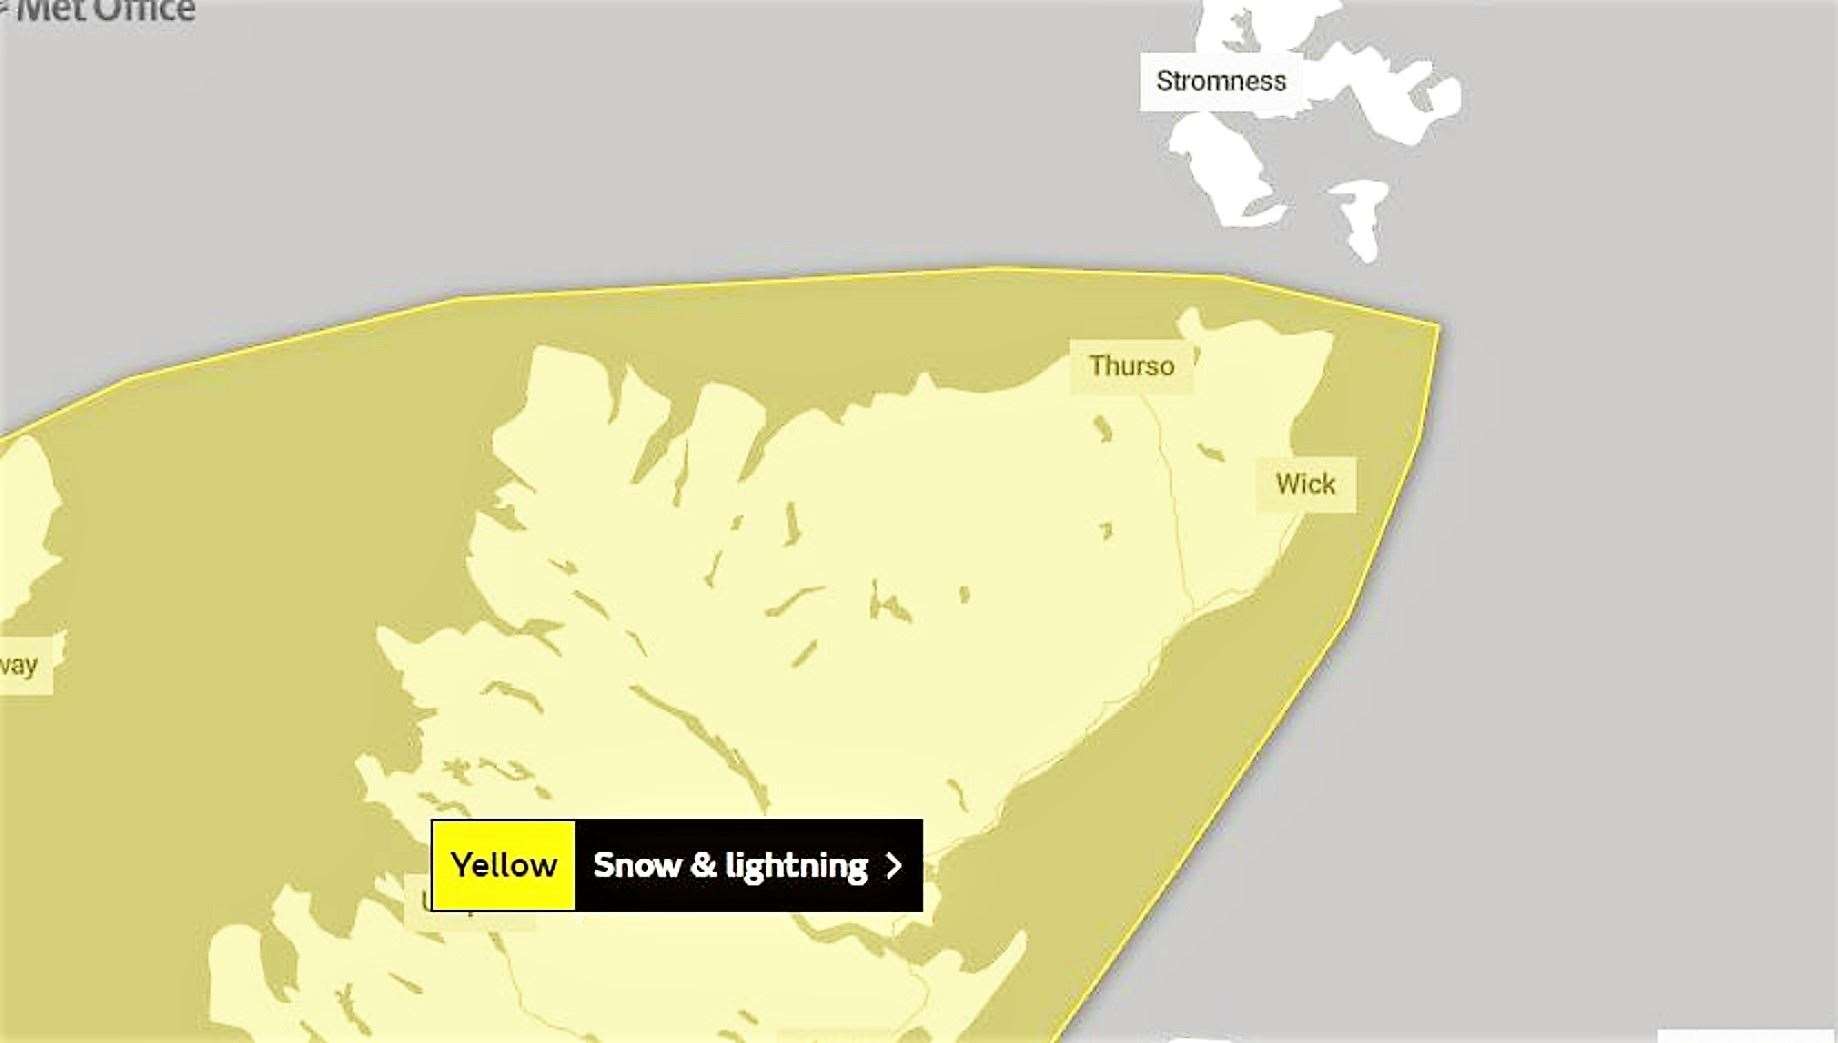 Met Office map warns of snow and lightning for today and tomorrow.